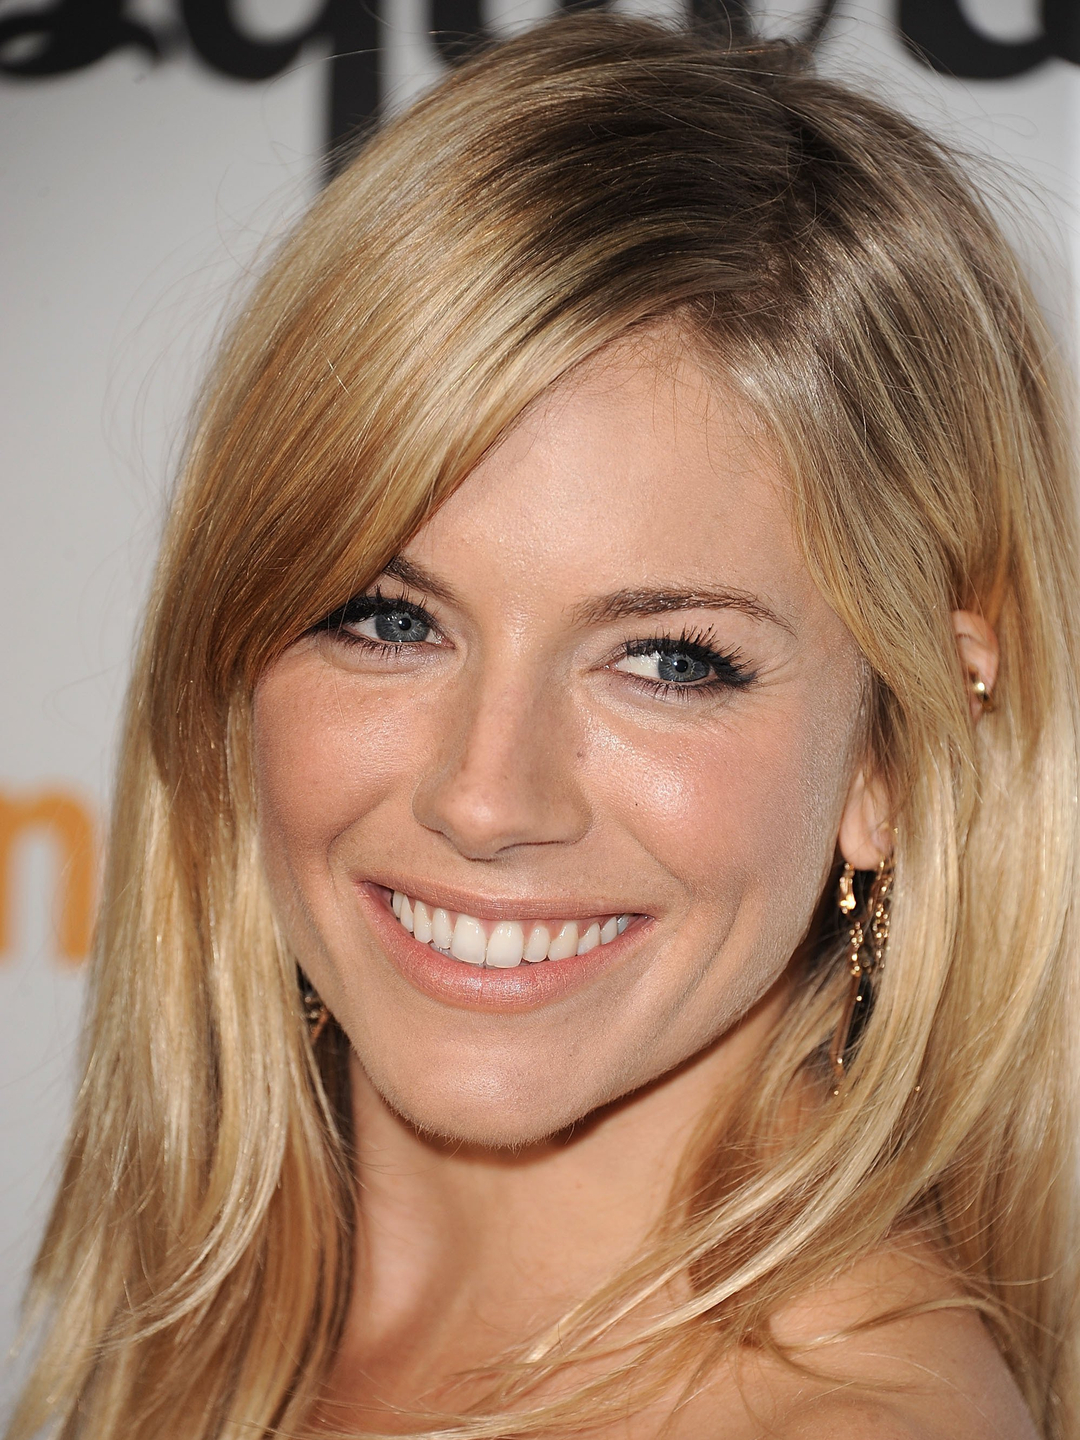 Sienna Miller early life